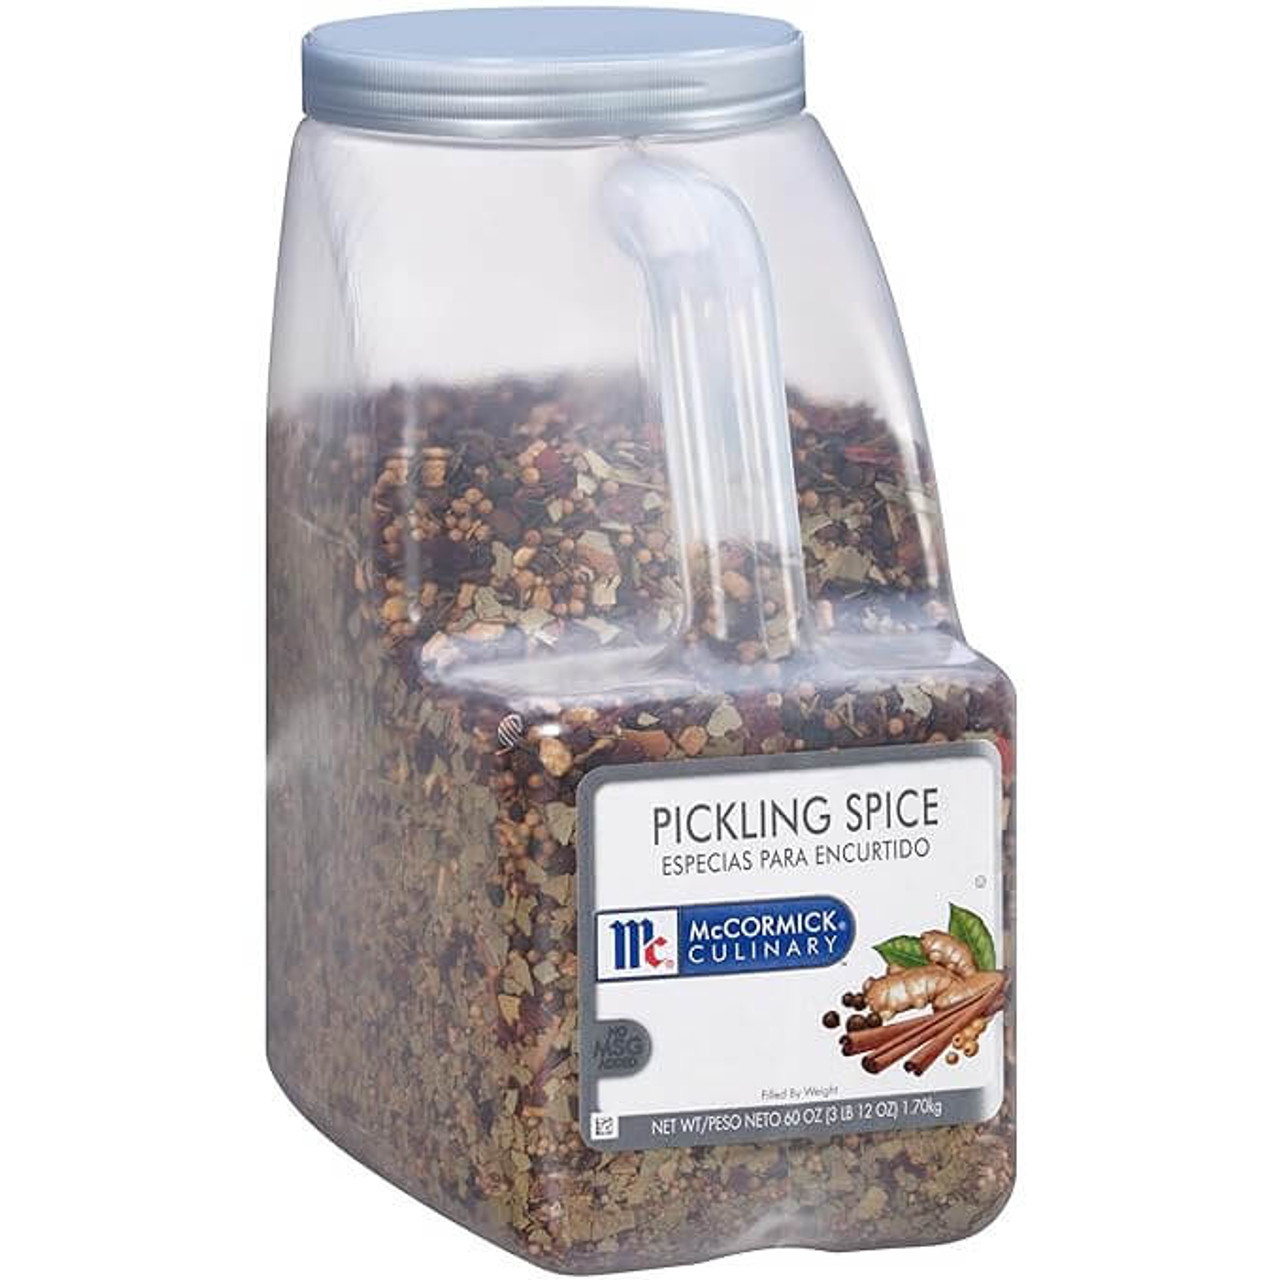 McCormick Culinary Pickling Spice, 3.75 lb. - 3/Case - Traditional Blend - Chicken Pieces